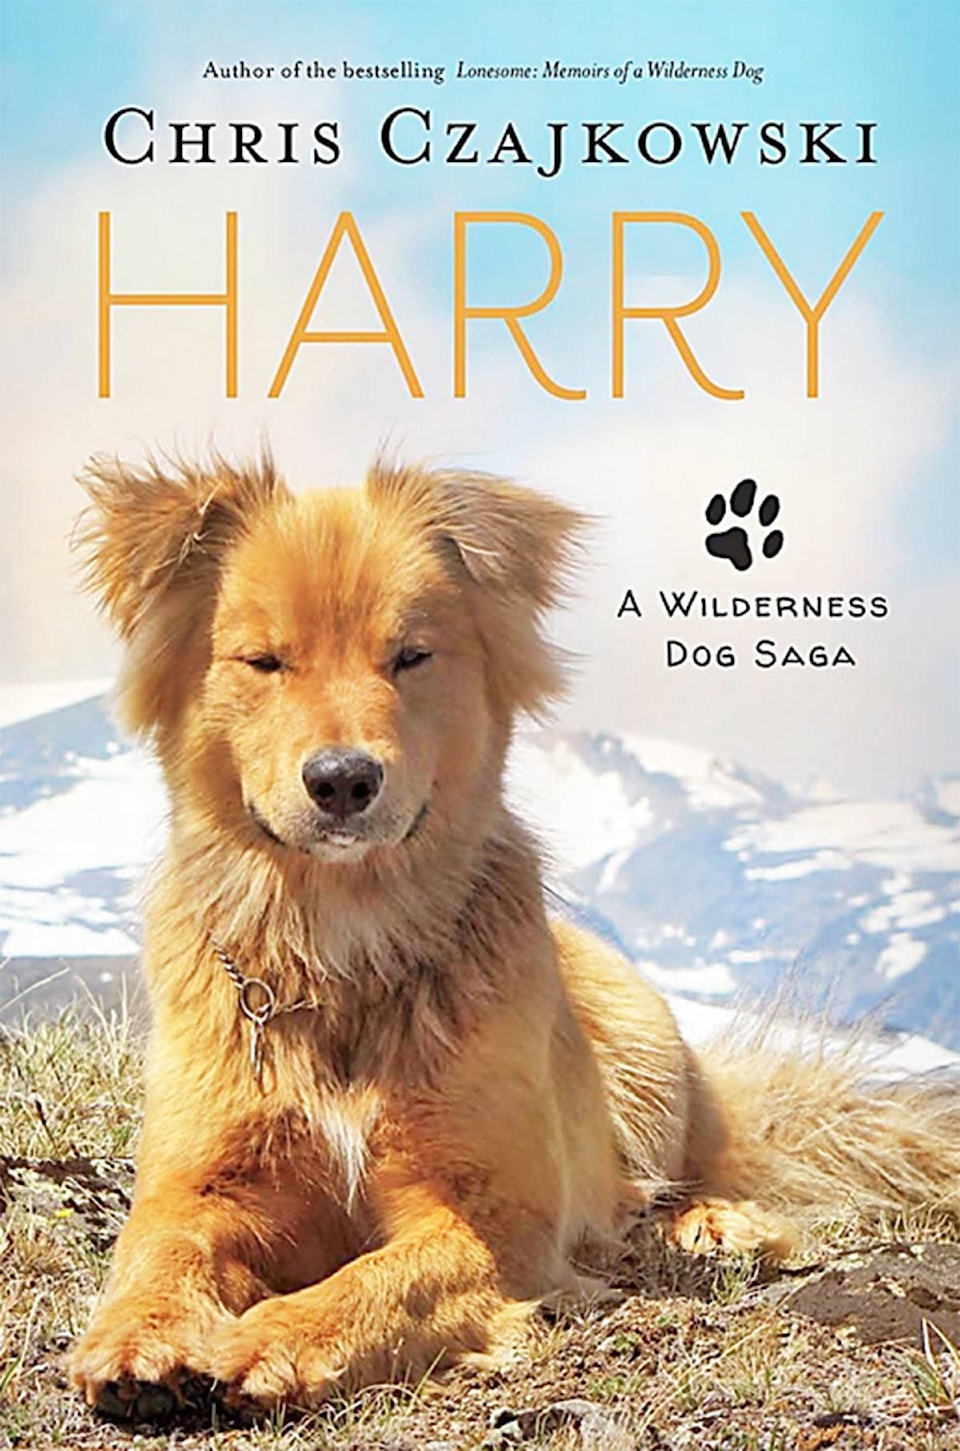 9147778_web1_Harry-book-cover